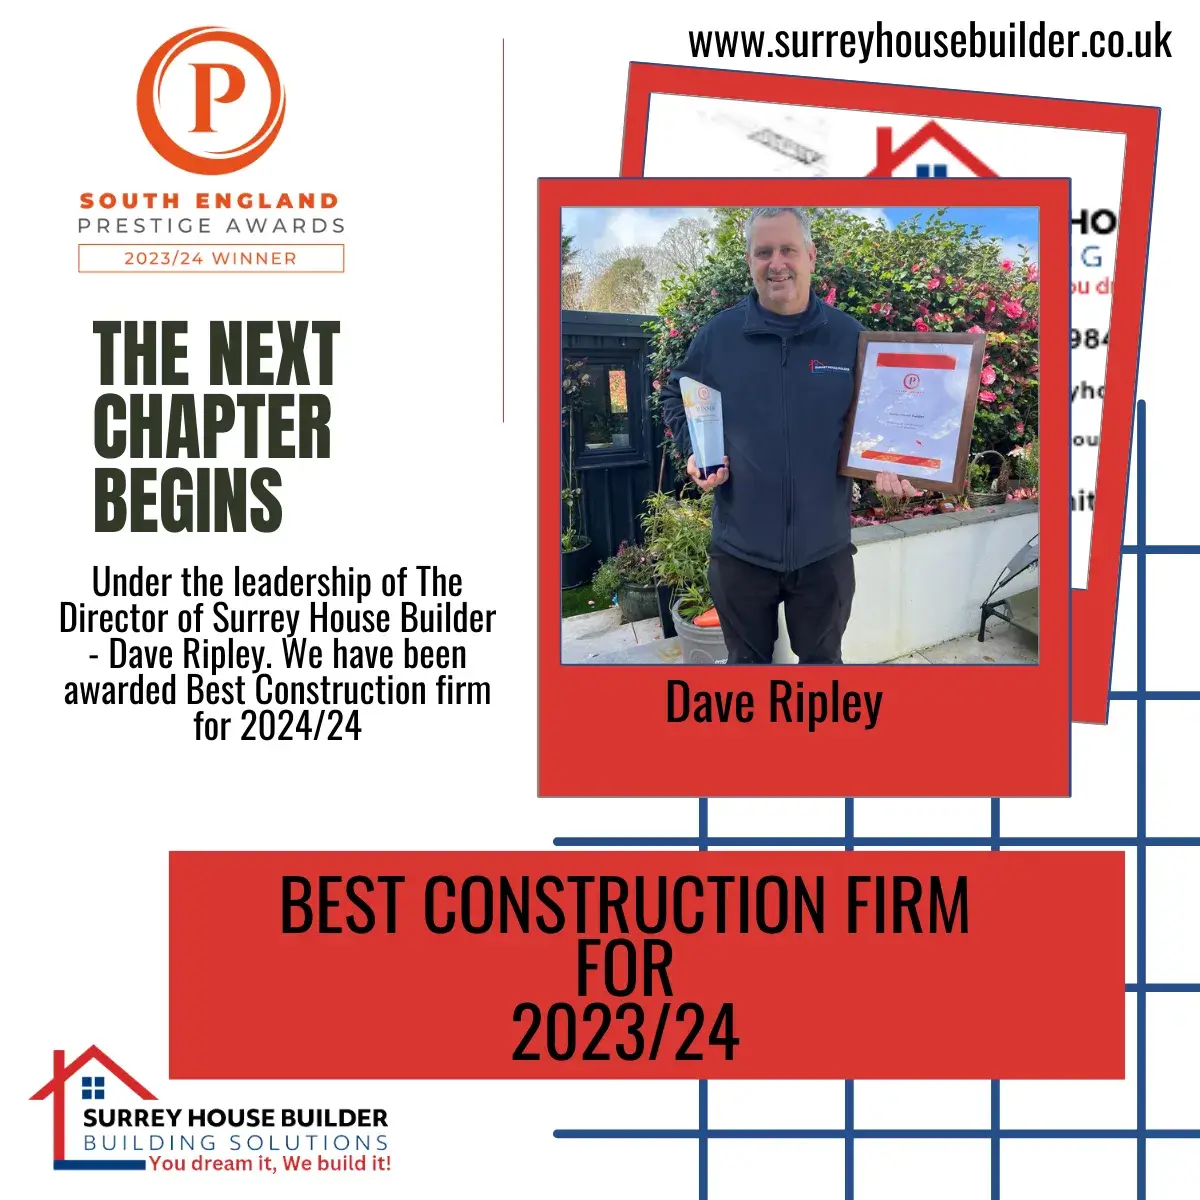 a flyer for the best construction firm for 2012 / 24